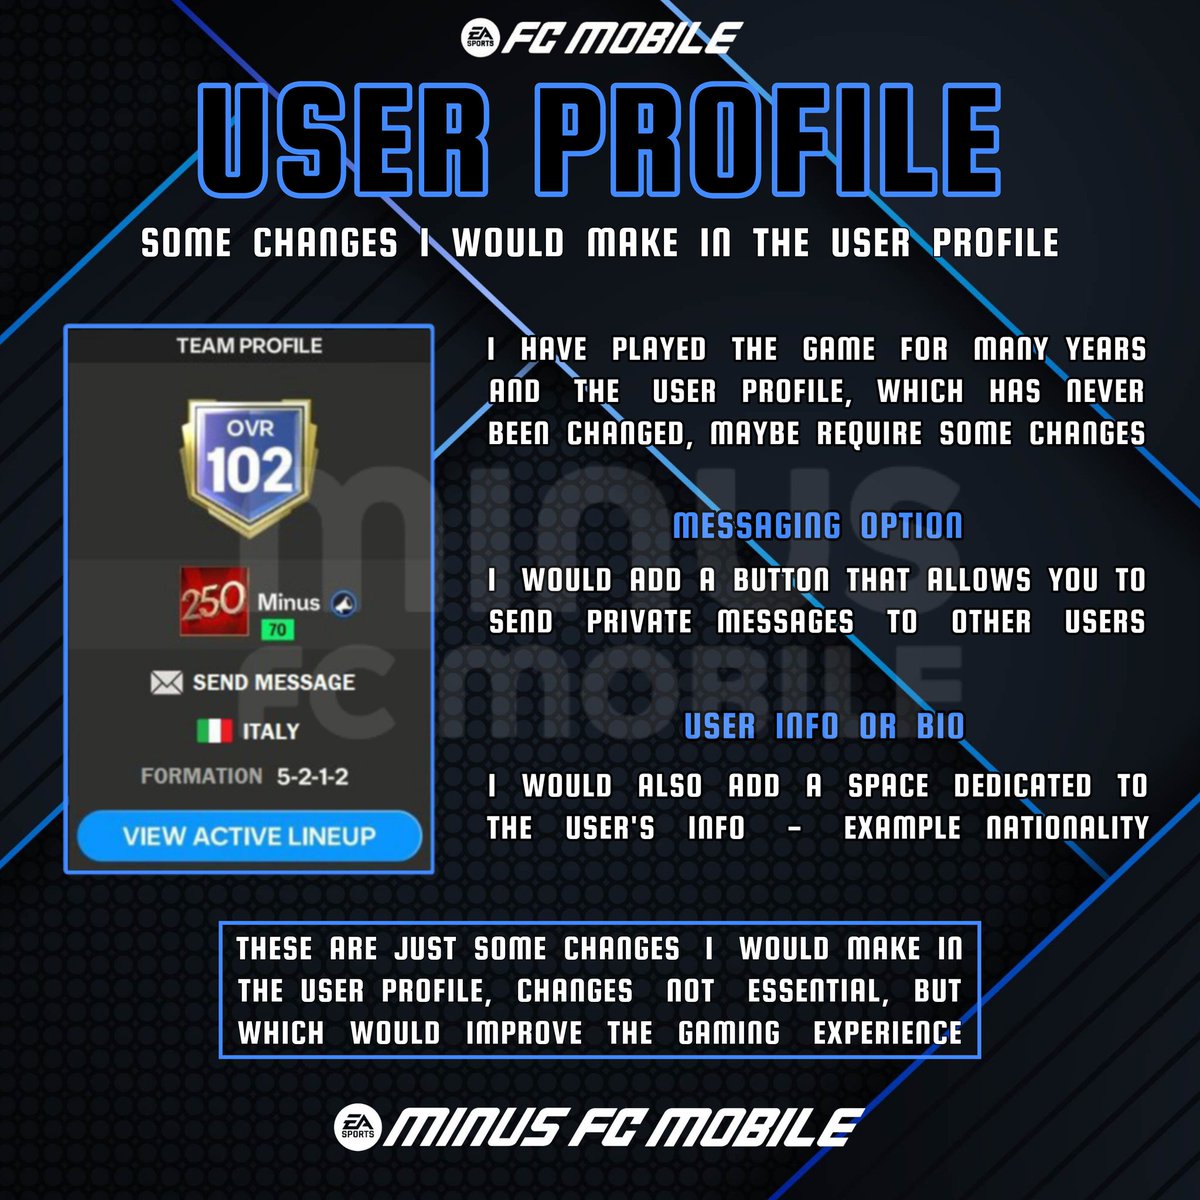 Sometimes the details make the difference, and while there's a lot more to Fix, I think an Upgrade like this to the User Profile would be much appreciated. What do you think about the possibility of sending DM within the Game? #FCMobile